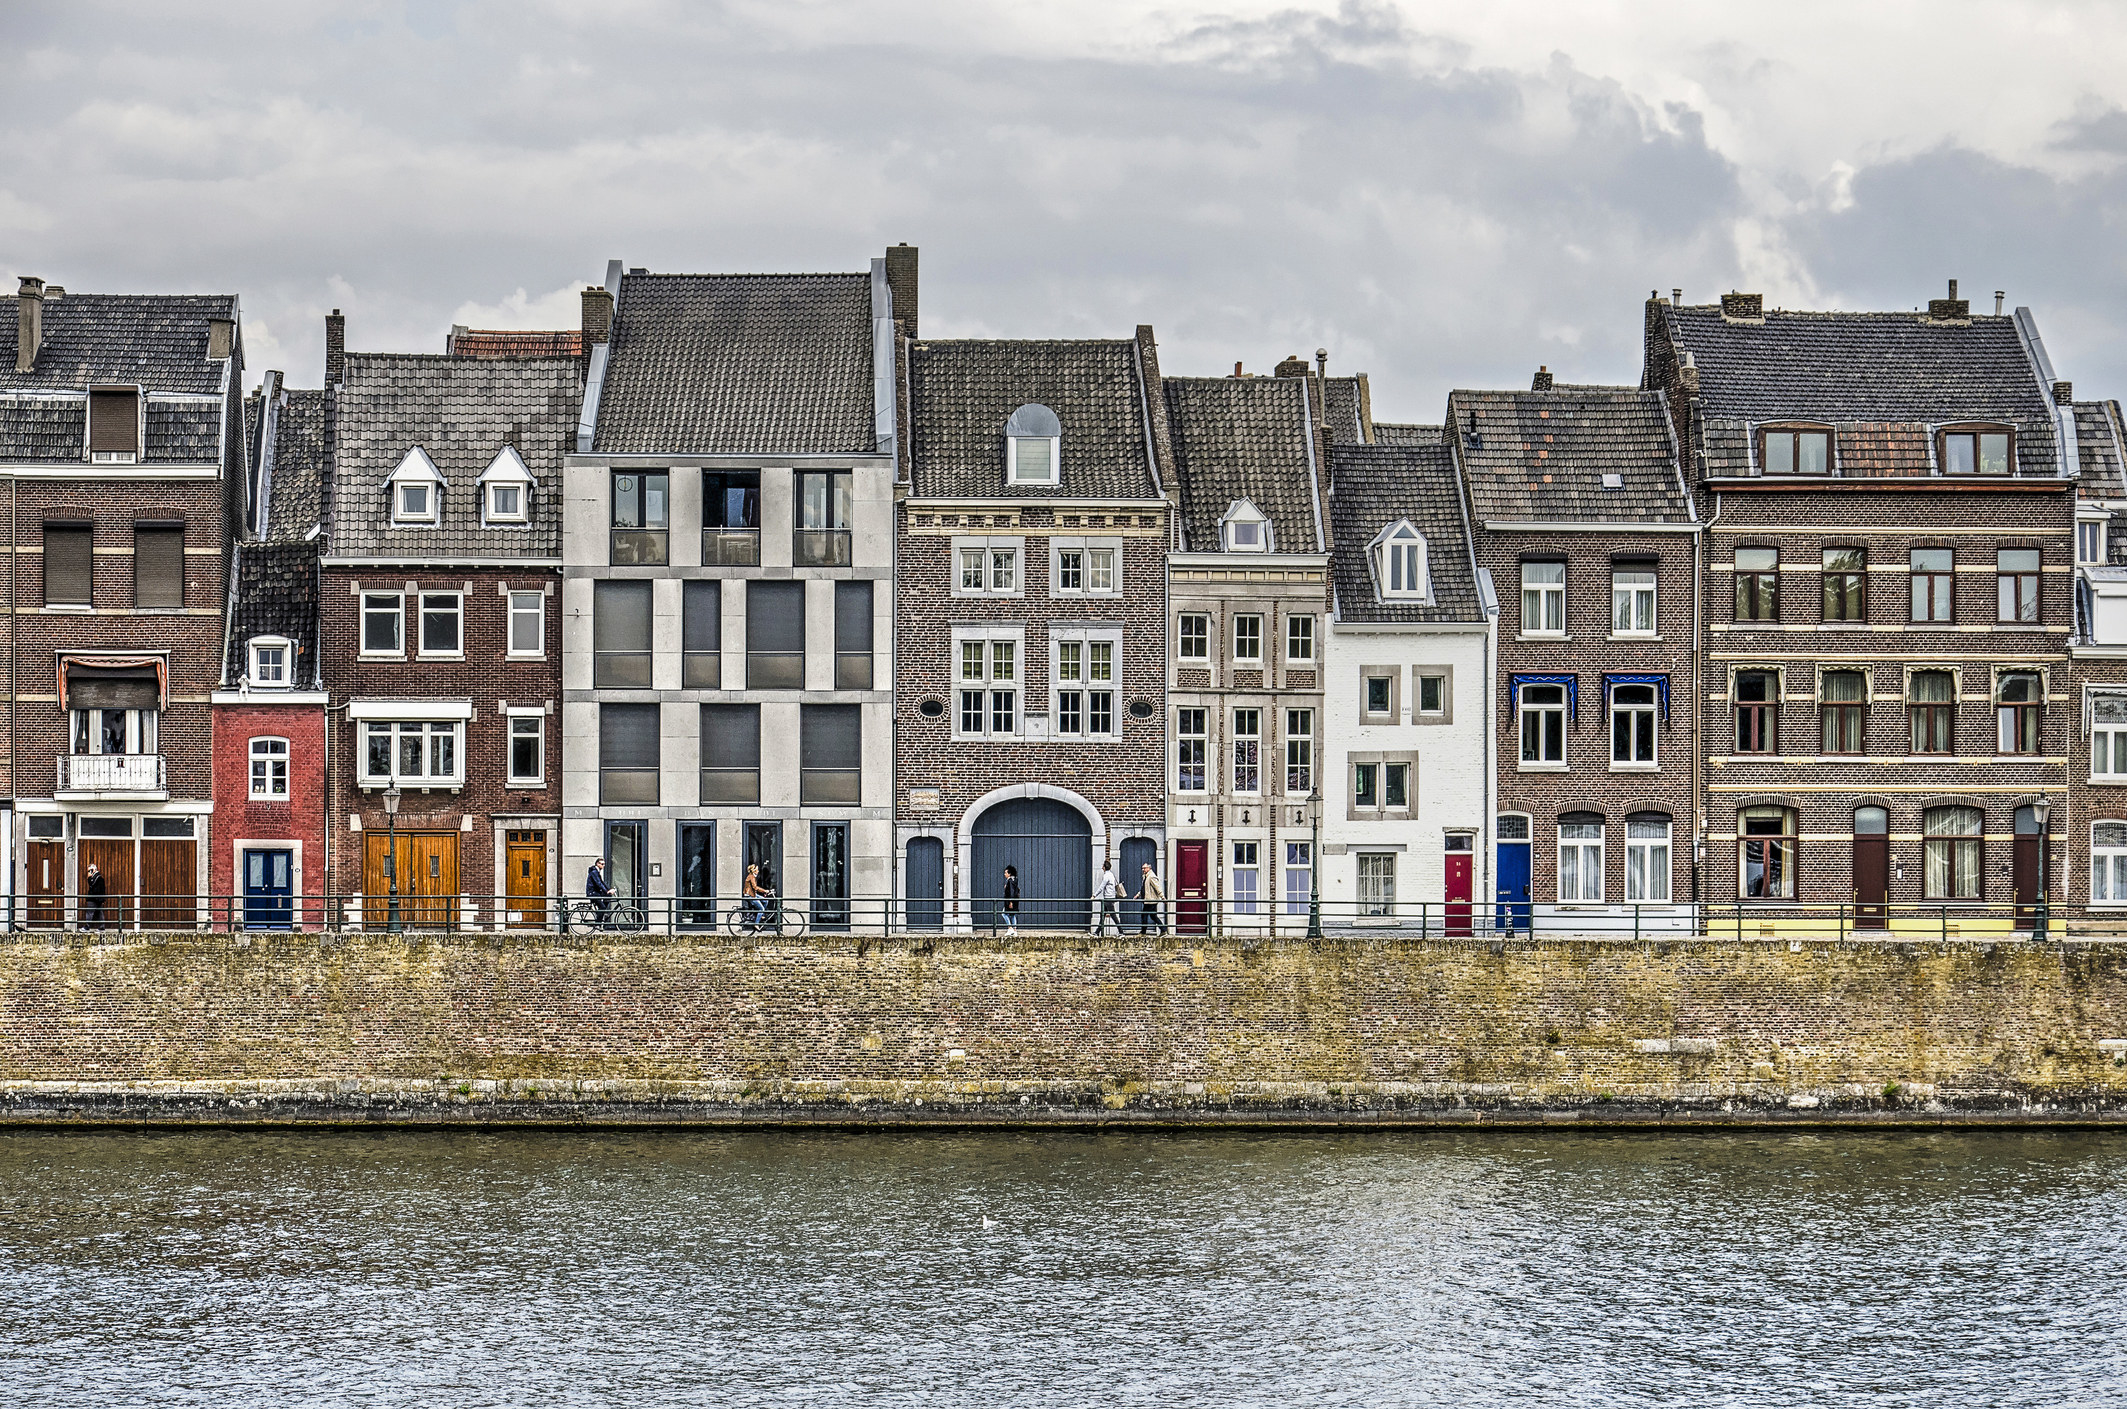 Buildings on a canal in Maastricht.